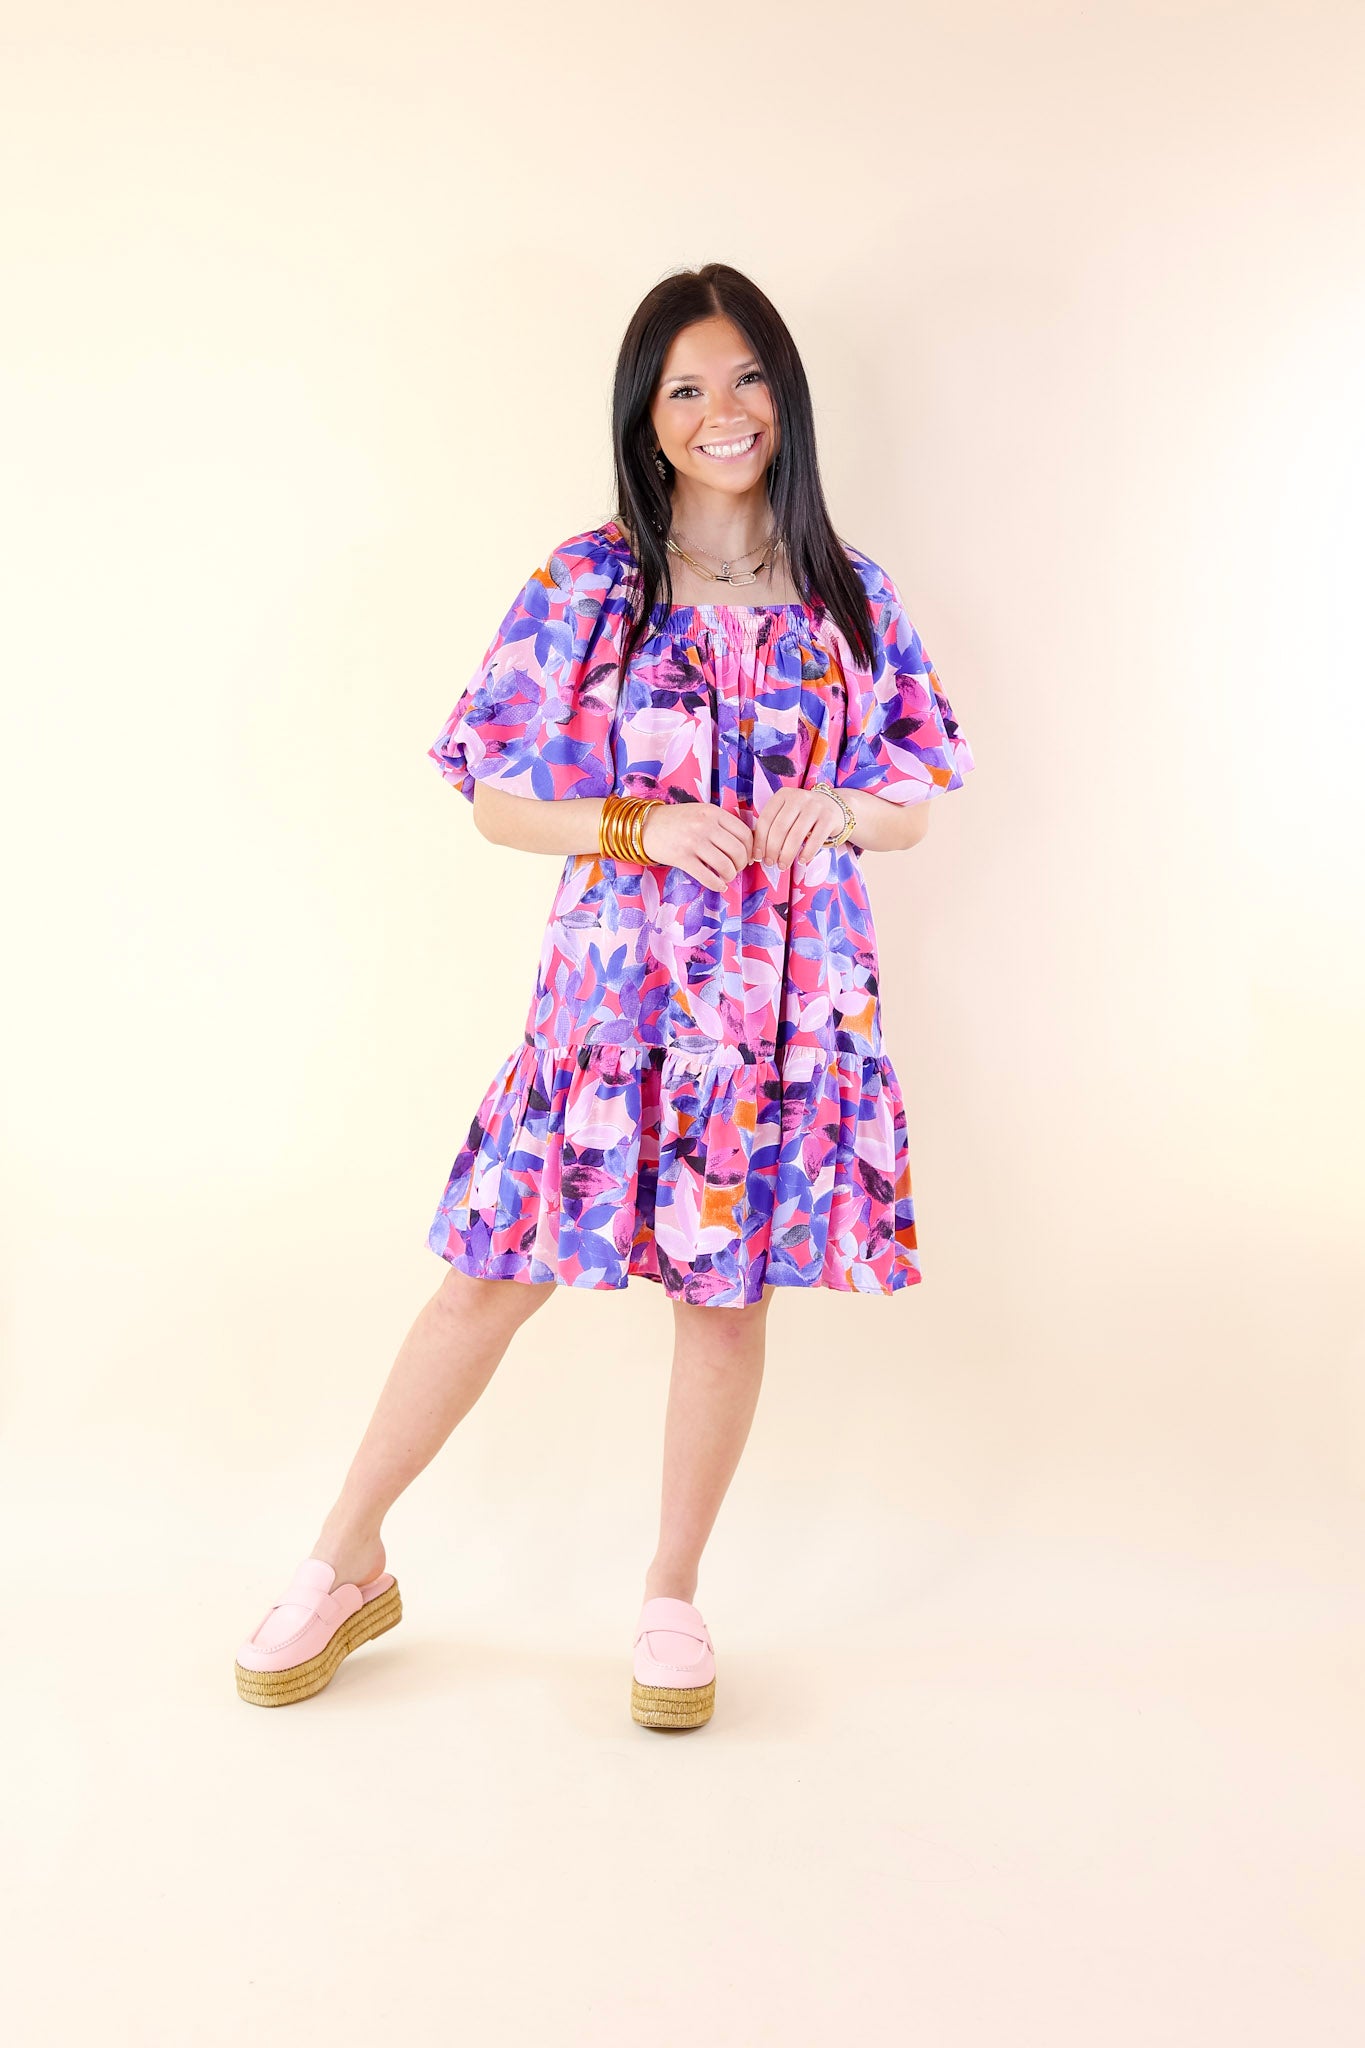 Blossoming Beauty Floral Print Dress in Magenta Pink